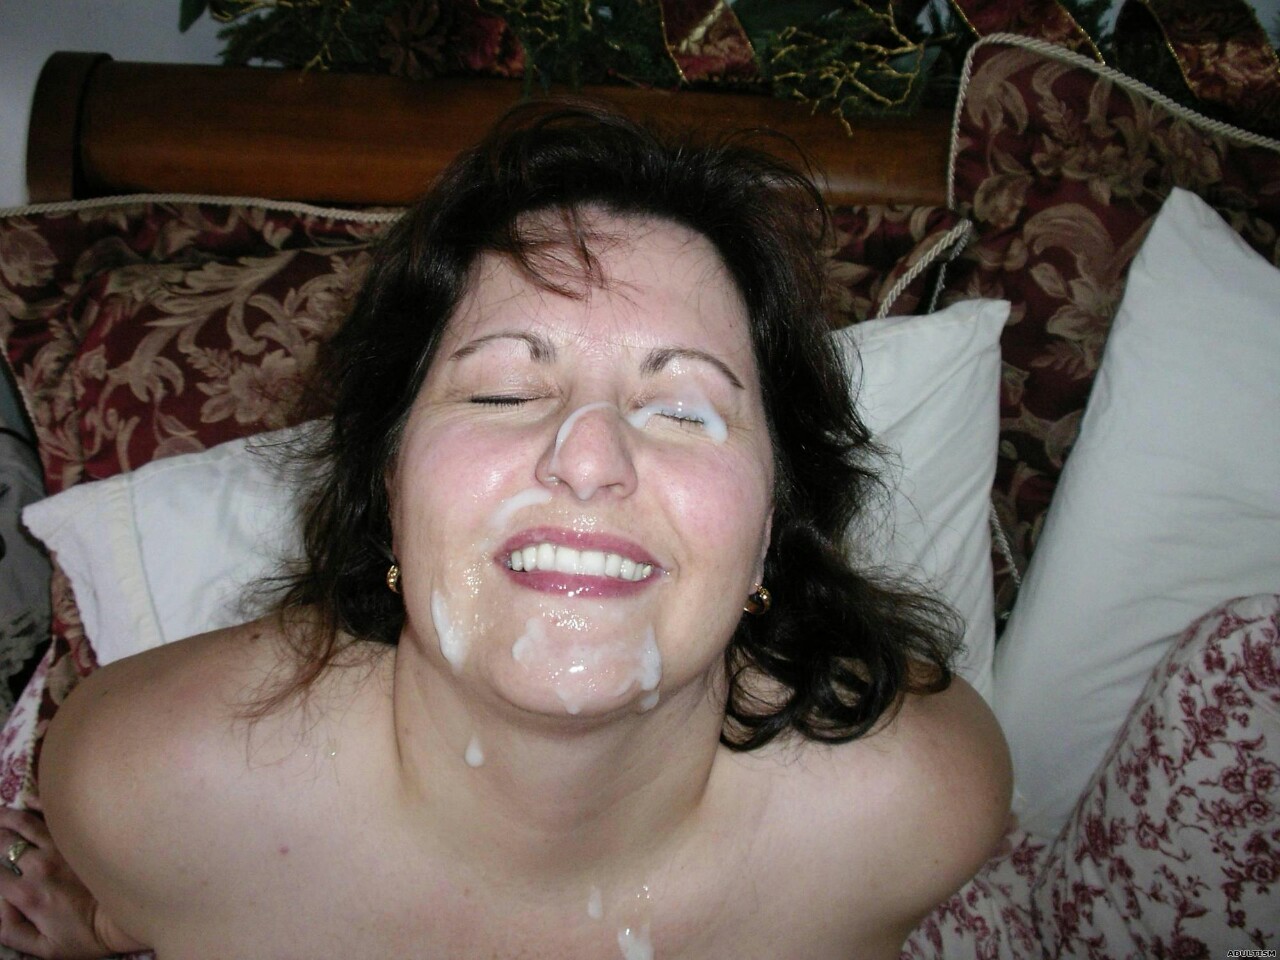 Patricia a wet granny its time to take her suns facial to show him whos it going